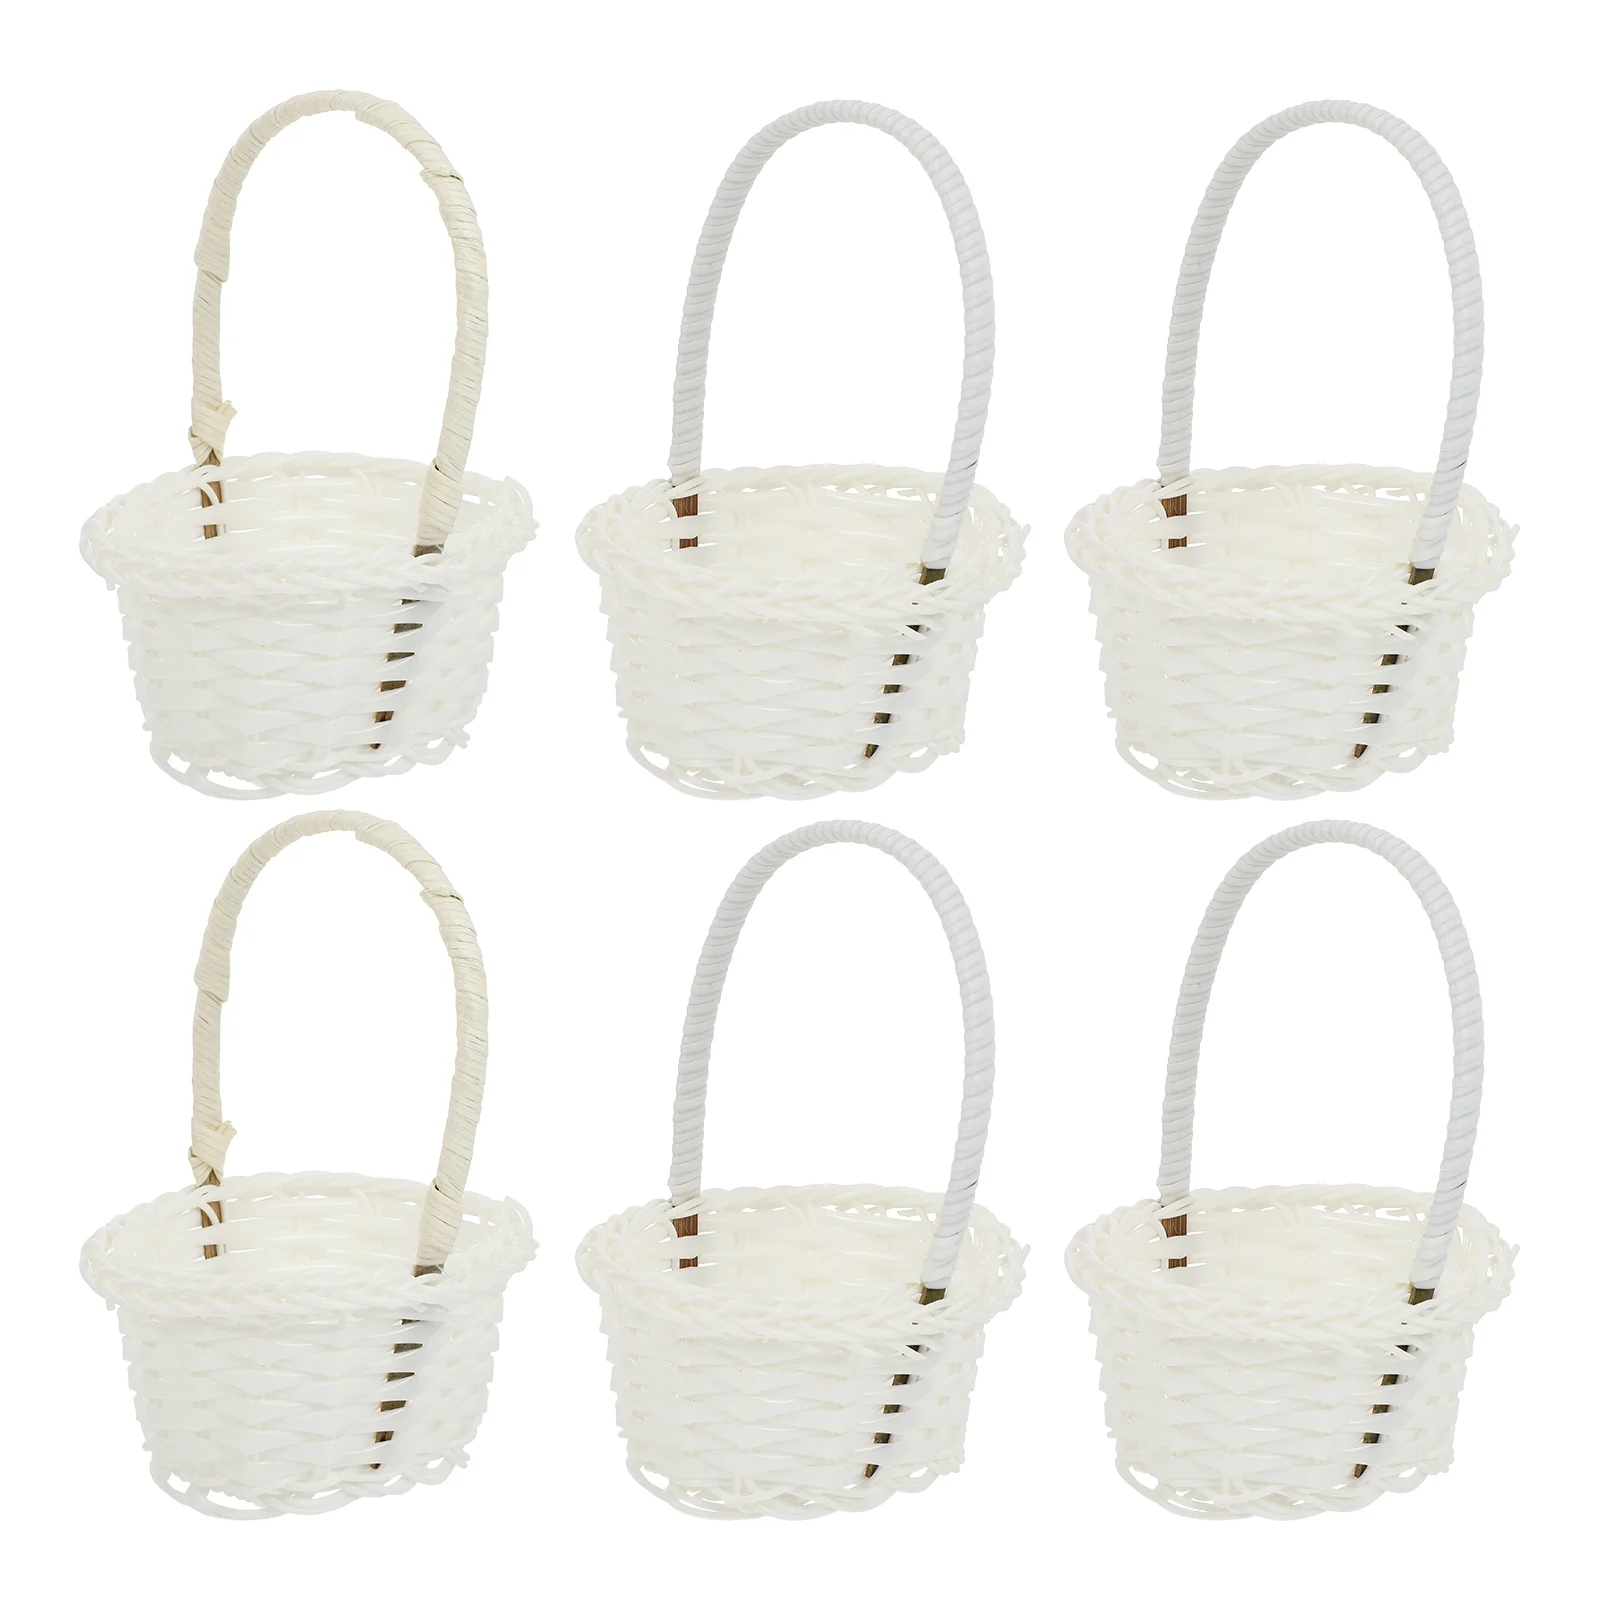 

Basket Woven Baskets Mini Flower Picnic Handle Wicker Rattan Storage Favors Girl Gift Easter Tiny Wedding Party Hamper Candy